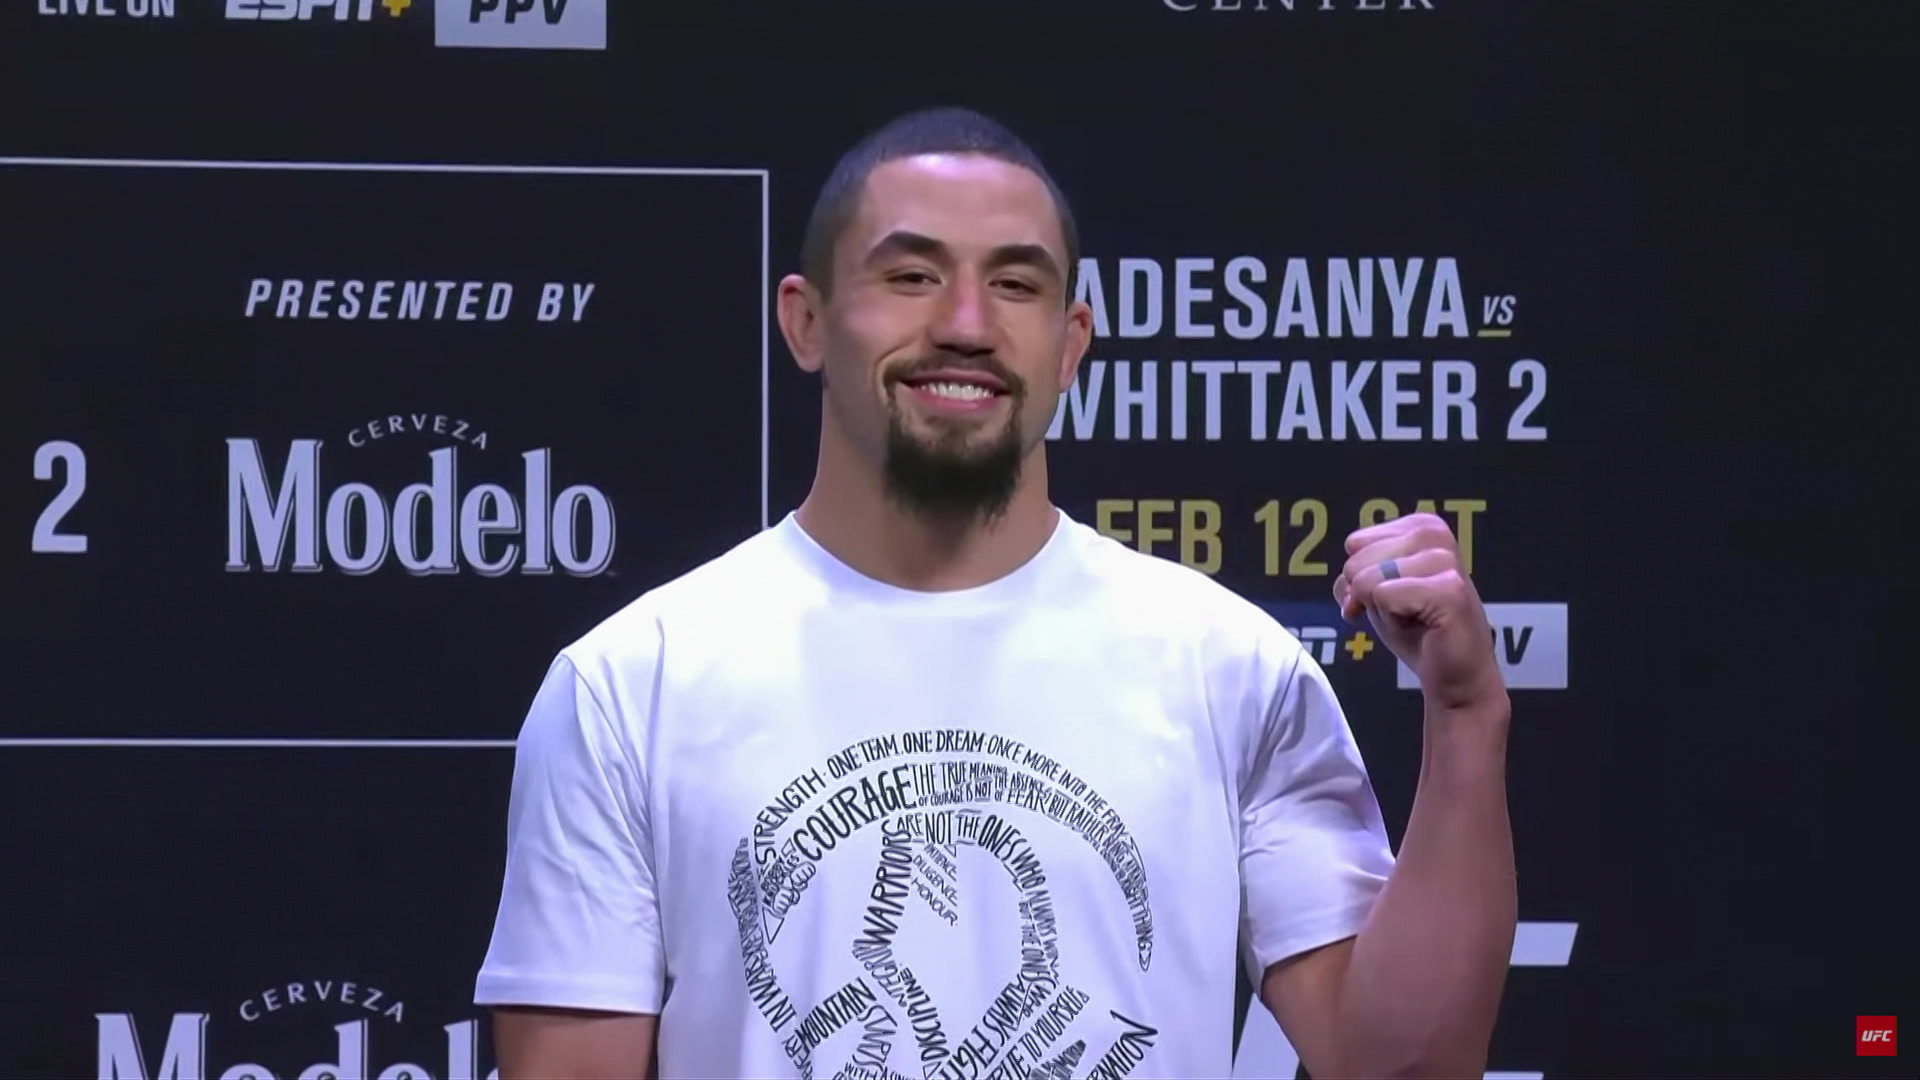 Robert Whittaker admits Israel Adesanya's trash talking played a factor in  their fight